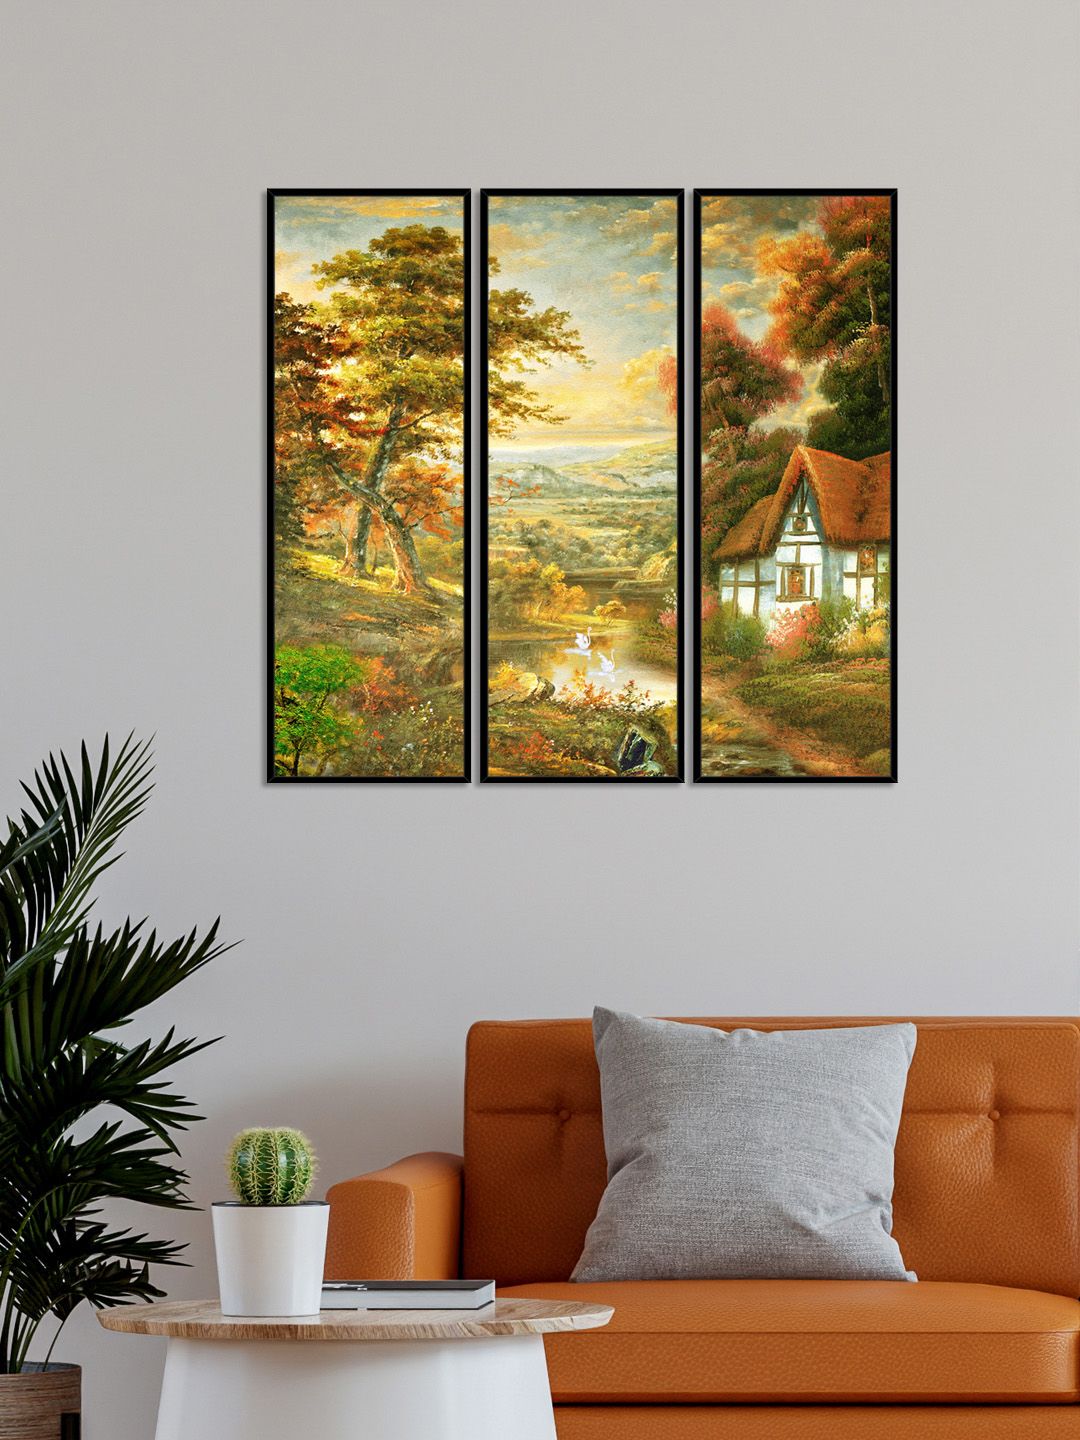 999Store Set of 3 Green Beautiful Nature Canvas Wall Art Price in India